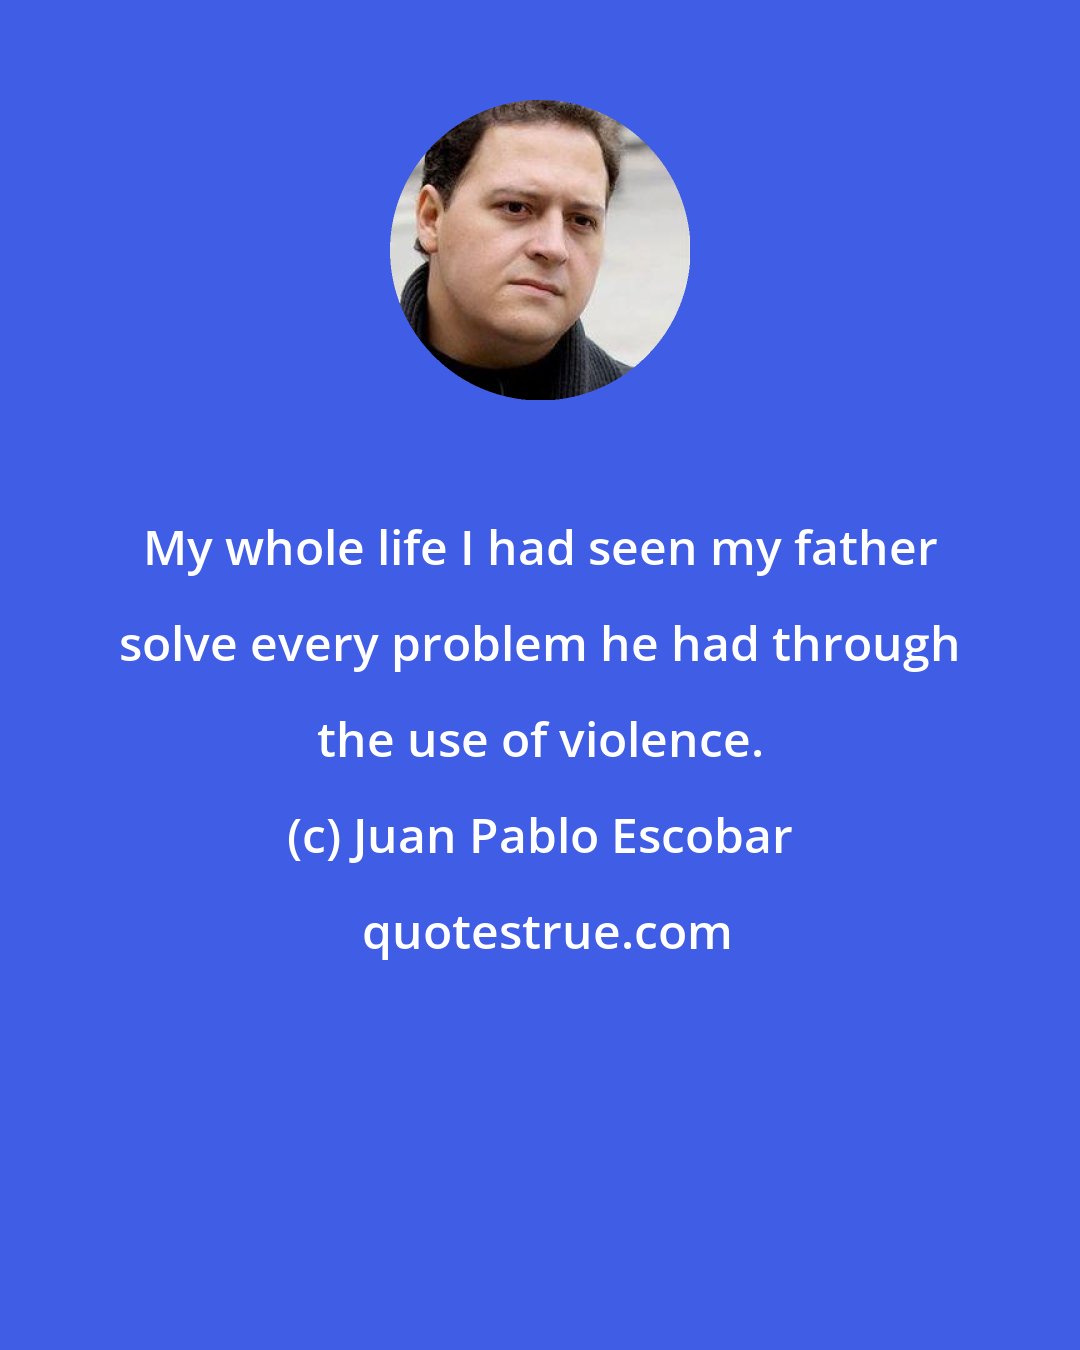 Juan Pablo Escobar: My whole life I had seen my father solve every problem he had through the use of violence.